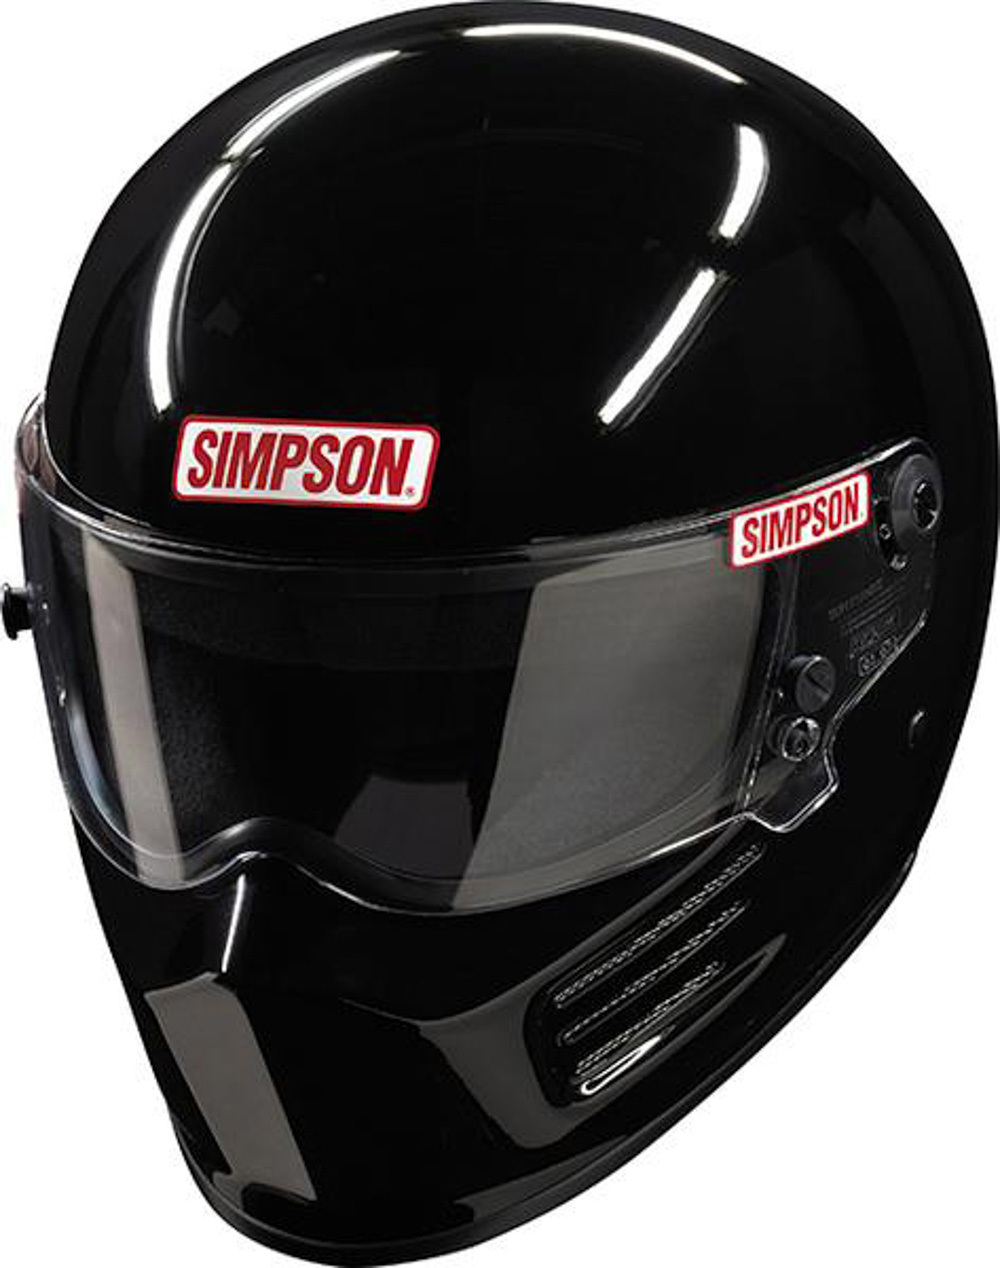 Helmet - Bandit - Snell SA2020 - Head and Neck Support Ready - Black - Small - Each